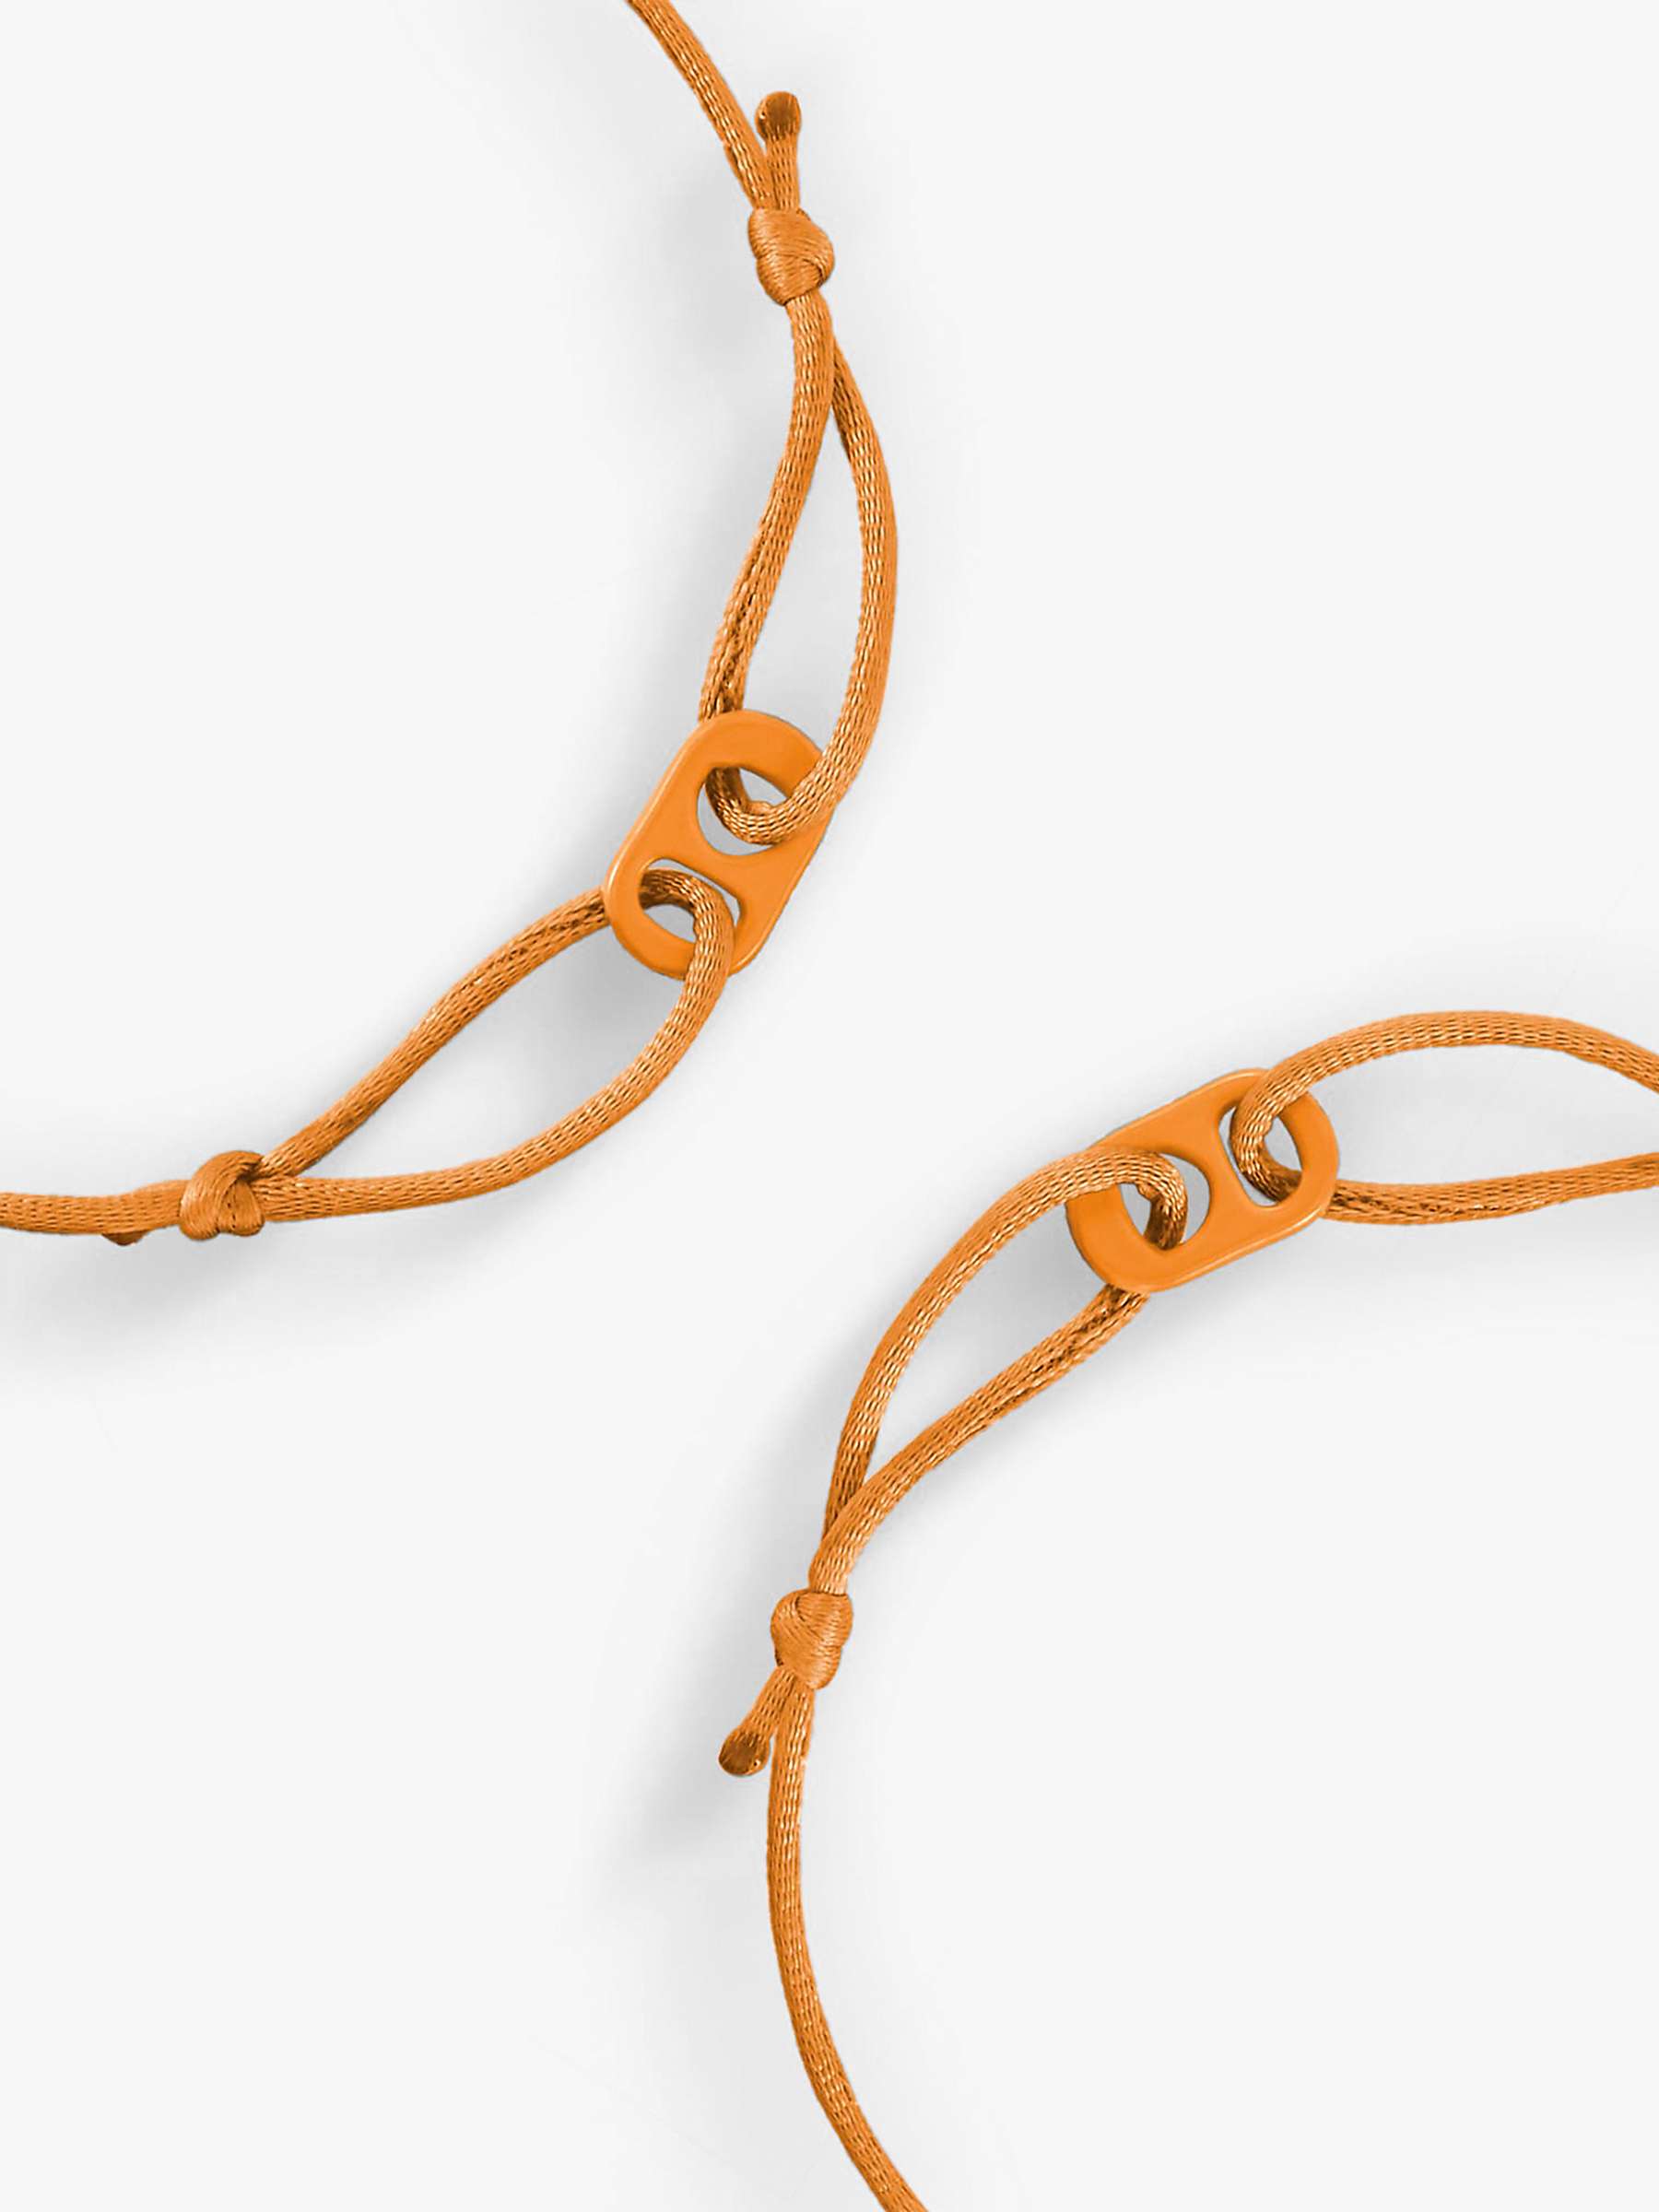 Buy #TOGETHERBAND UN Goal 11 - Sustainable Cities and Communities Recycled Plastic Mini Bracelet, Pack of 2, Golden Yellow Online at johnlewis.com